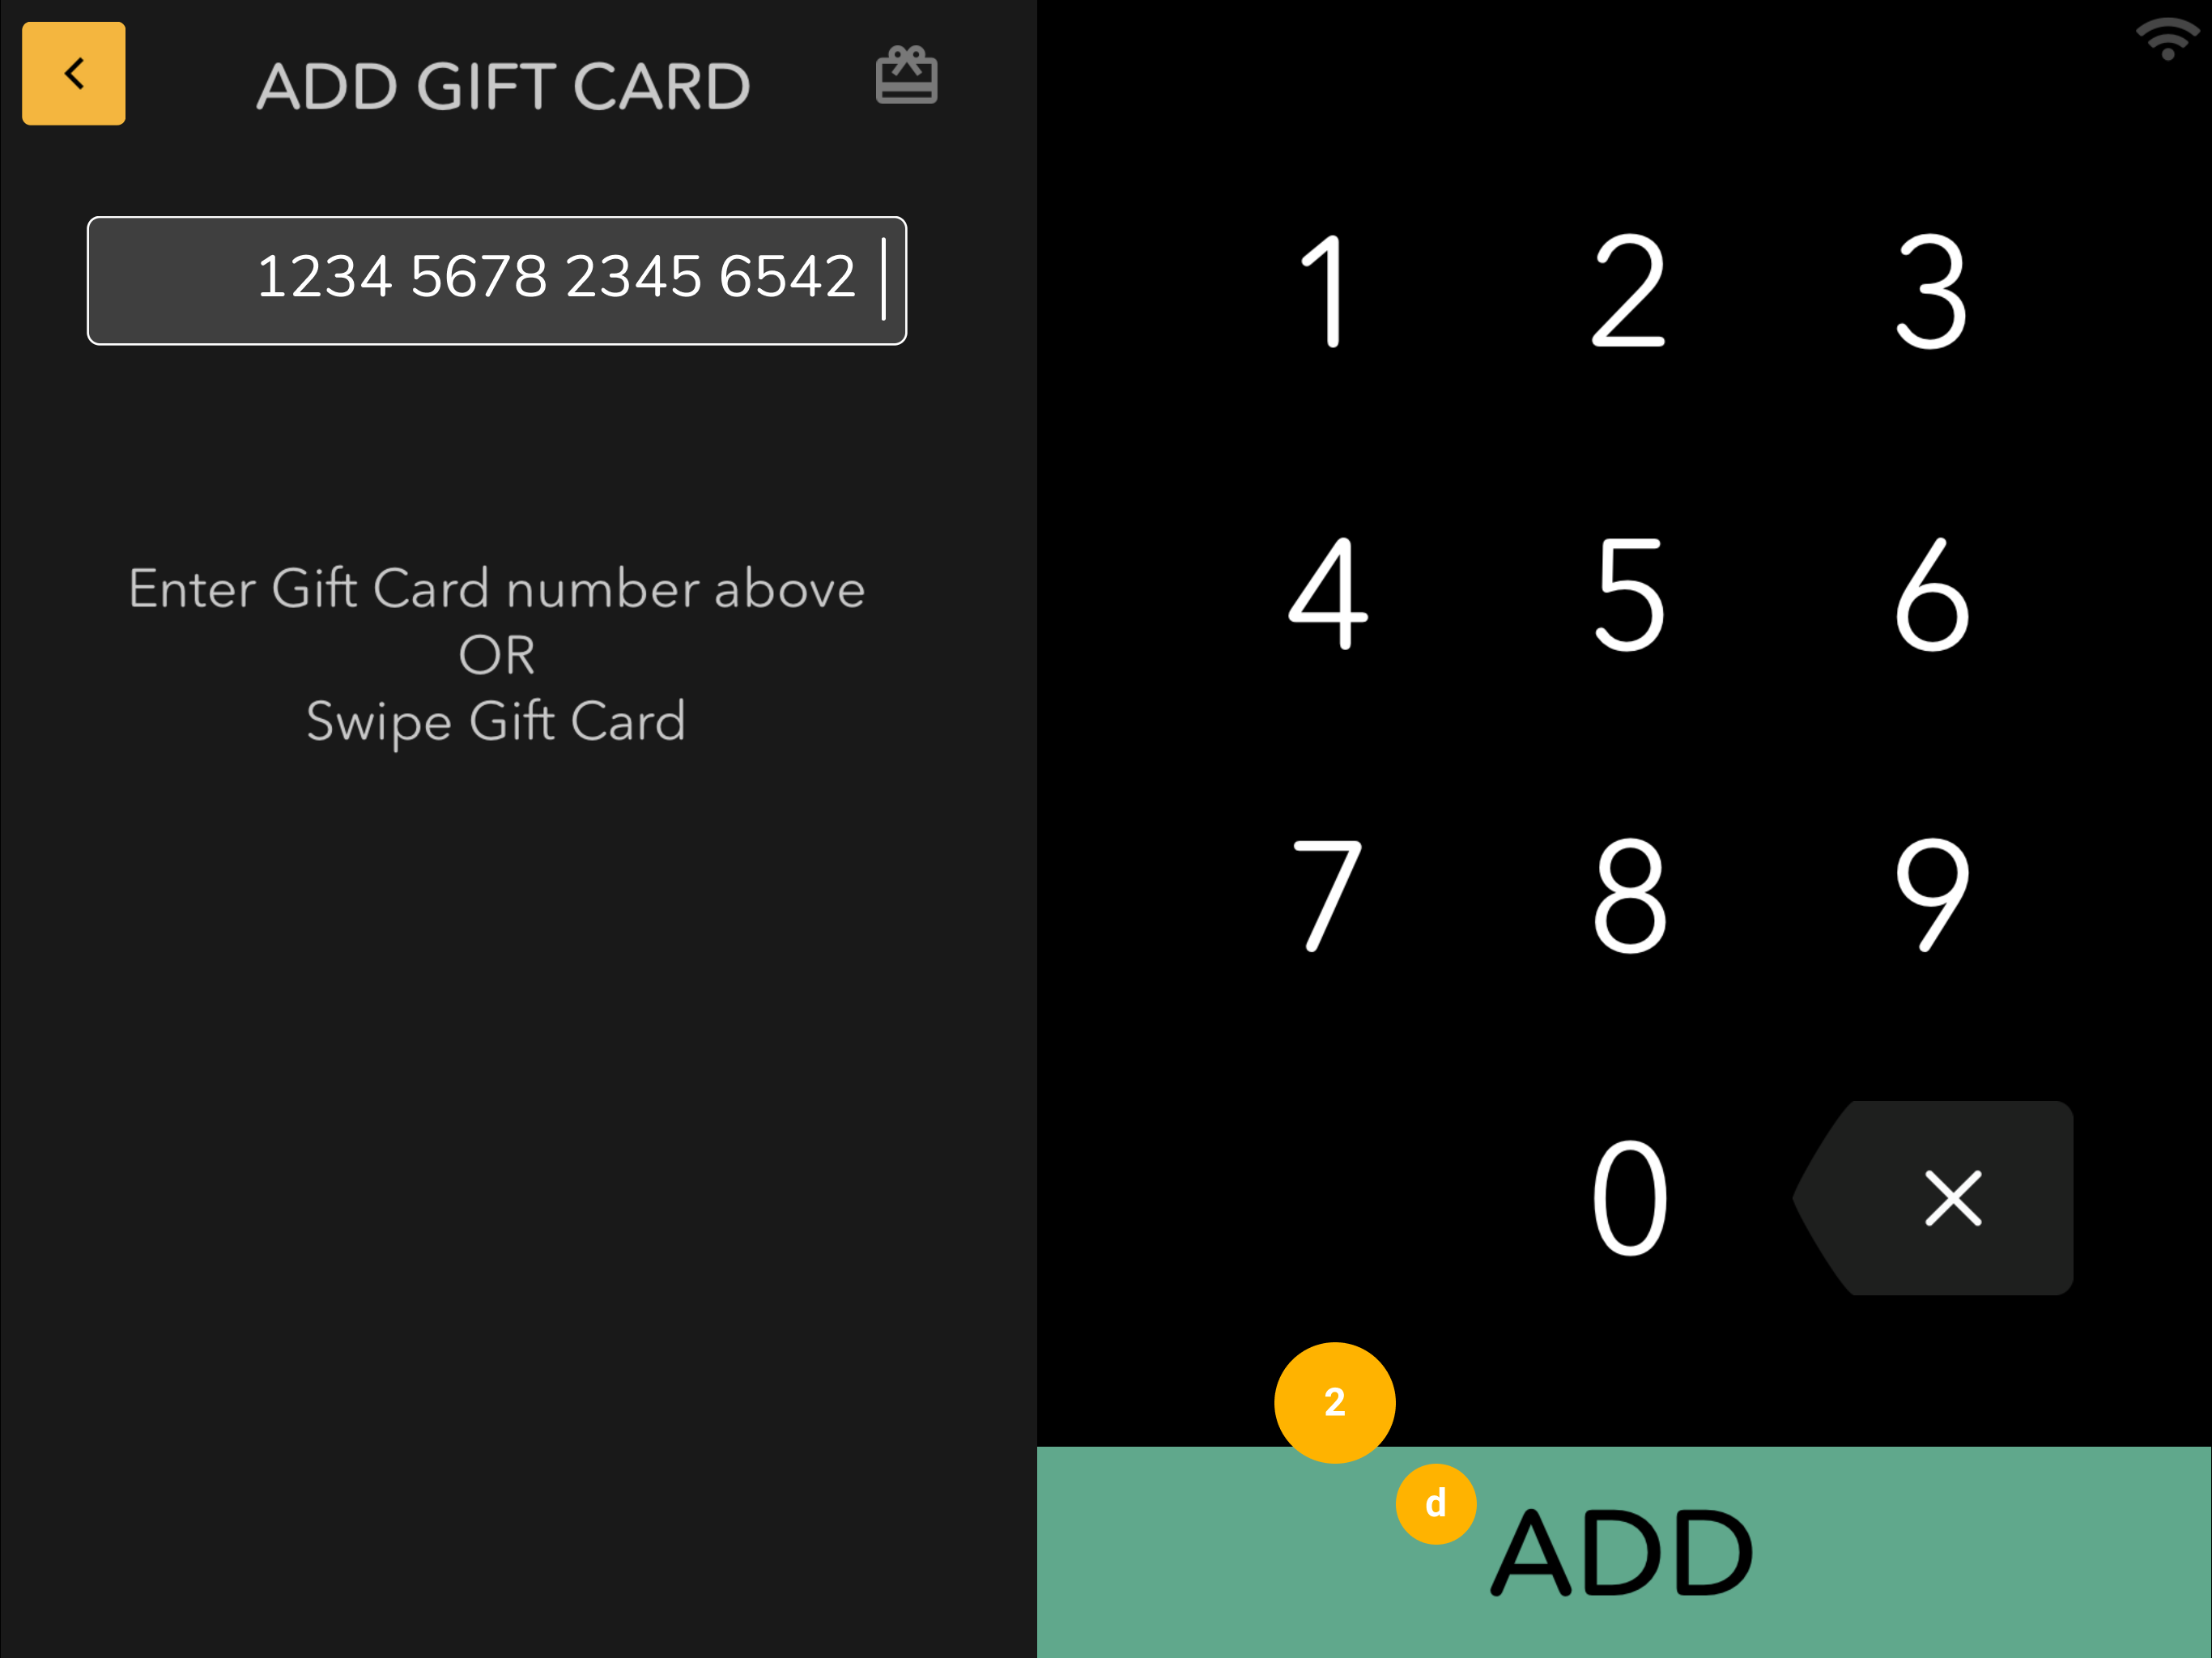 005_Add_a_Gift_Card_Payment.png